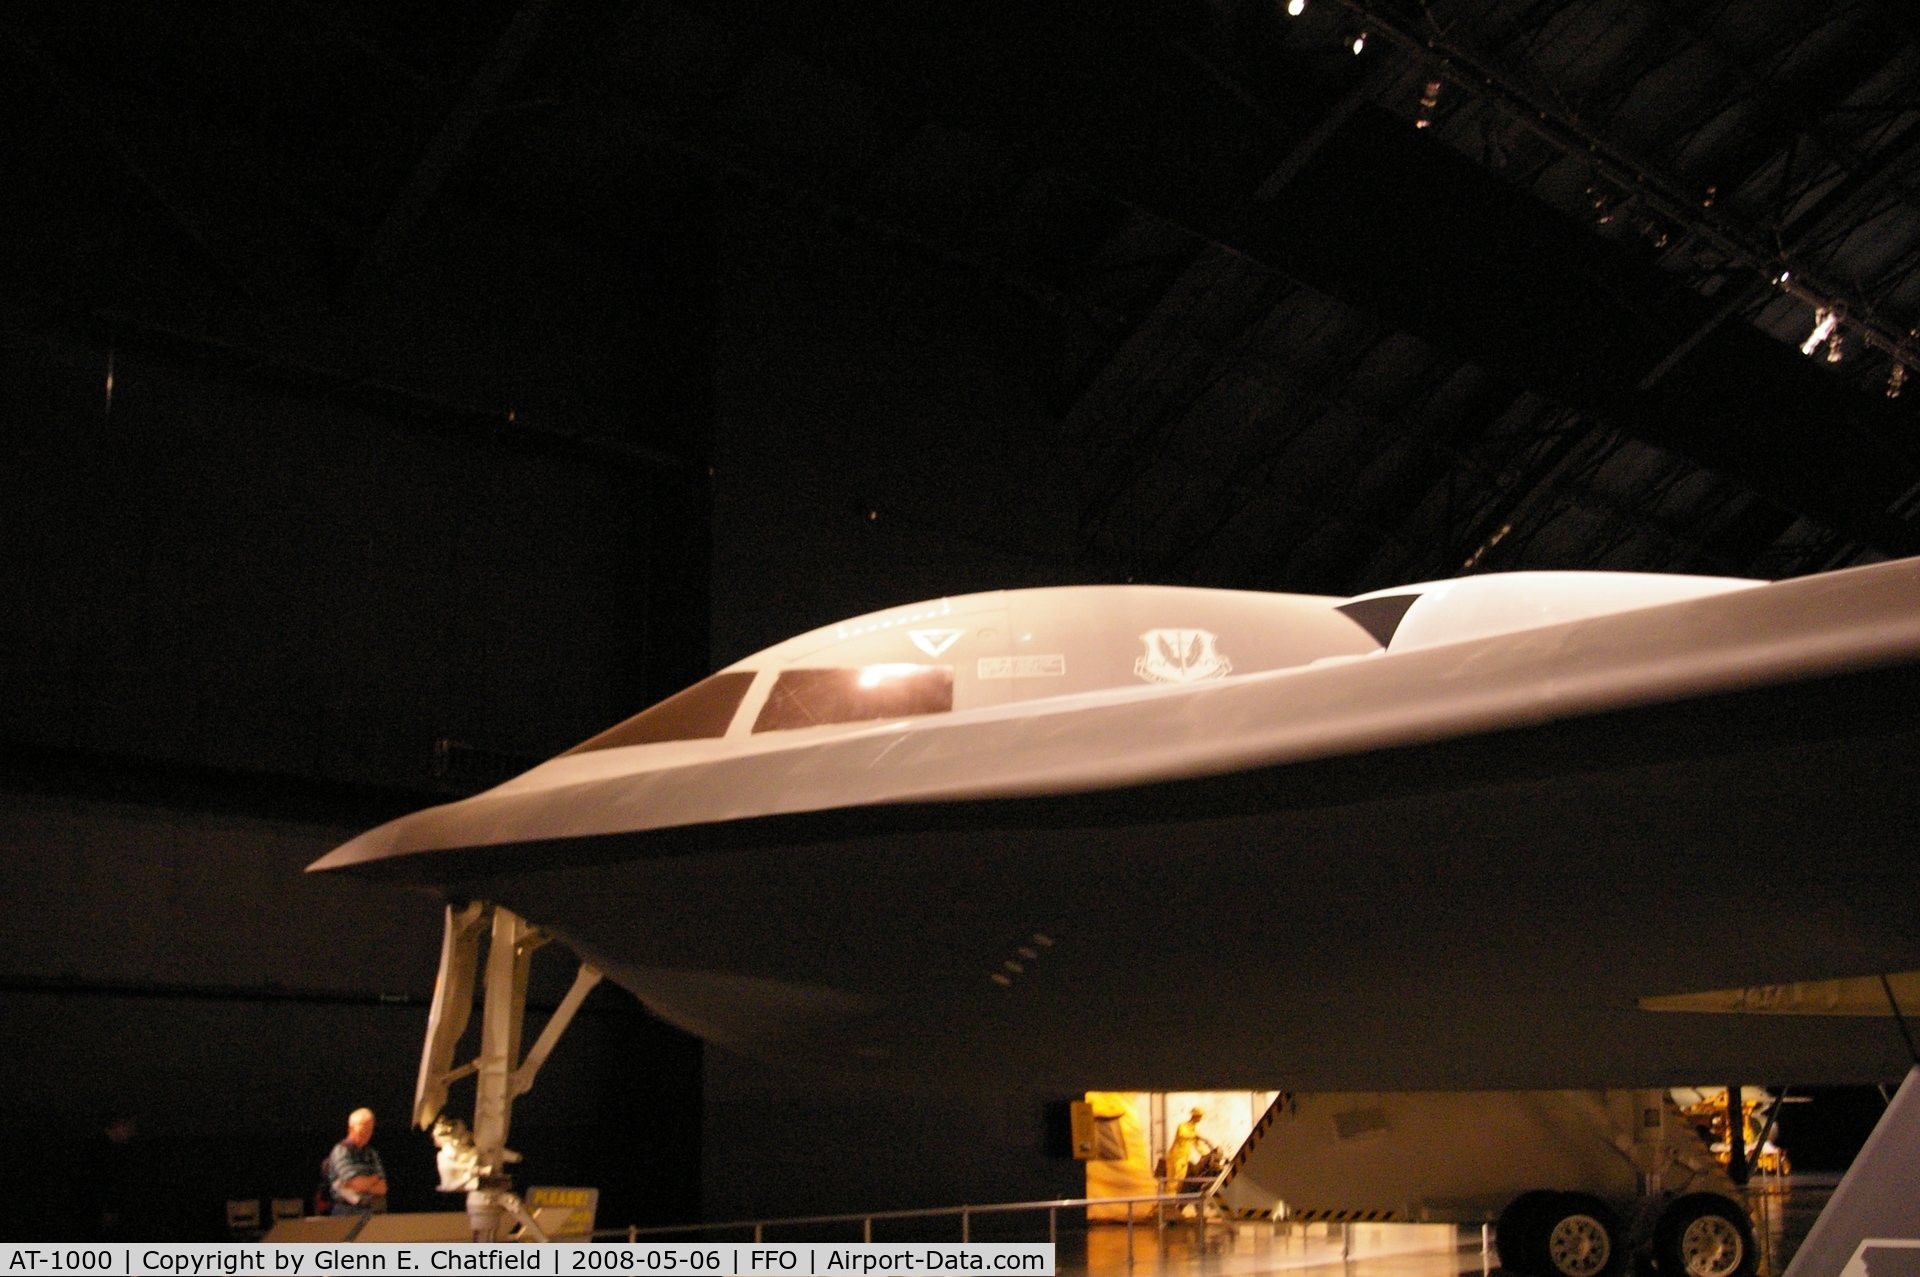 AT-1000, 1982 Northrop Grumman B-2A Spirit C/N Not found AT-1000, Non-flying test model at the National Museum of the U.S. Air Force